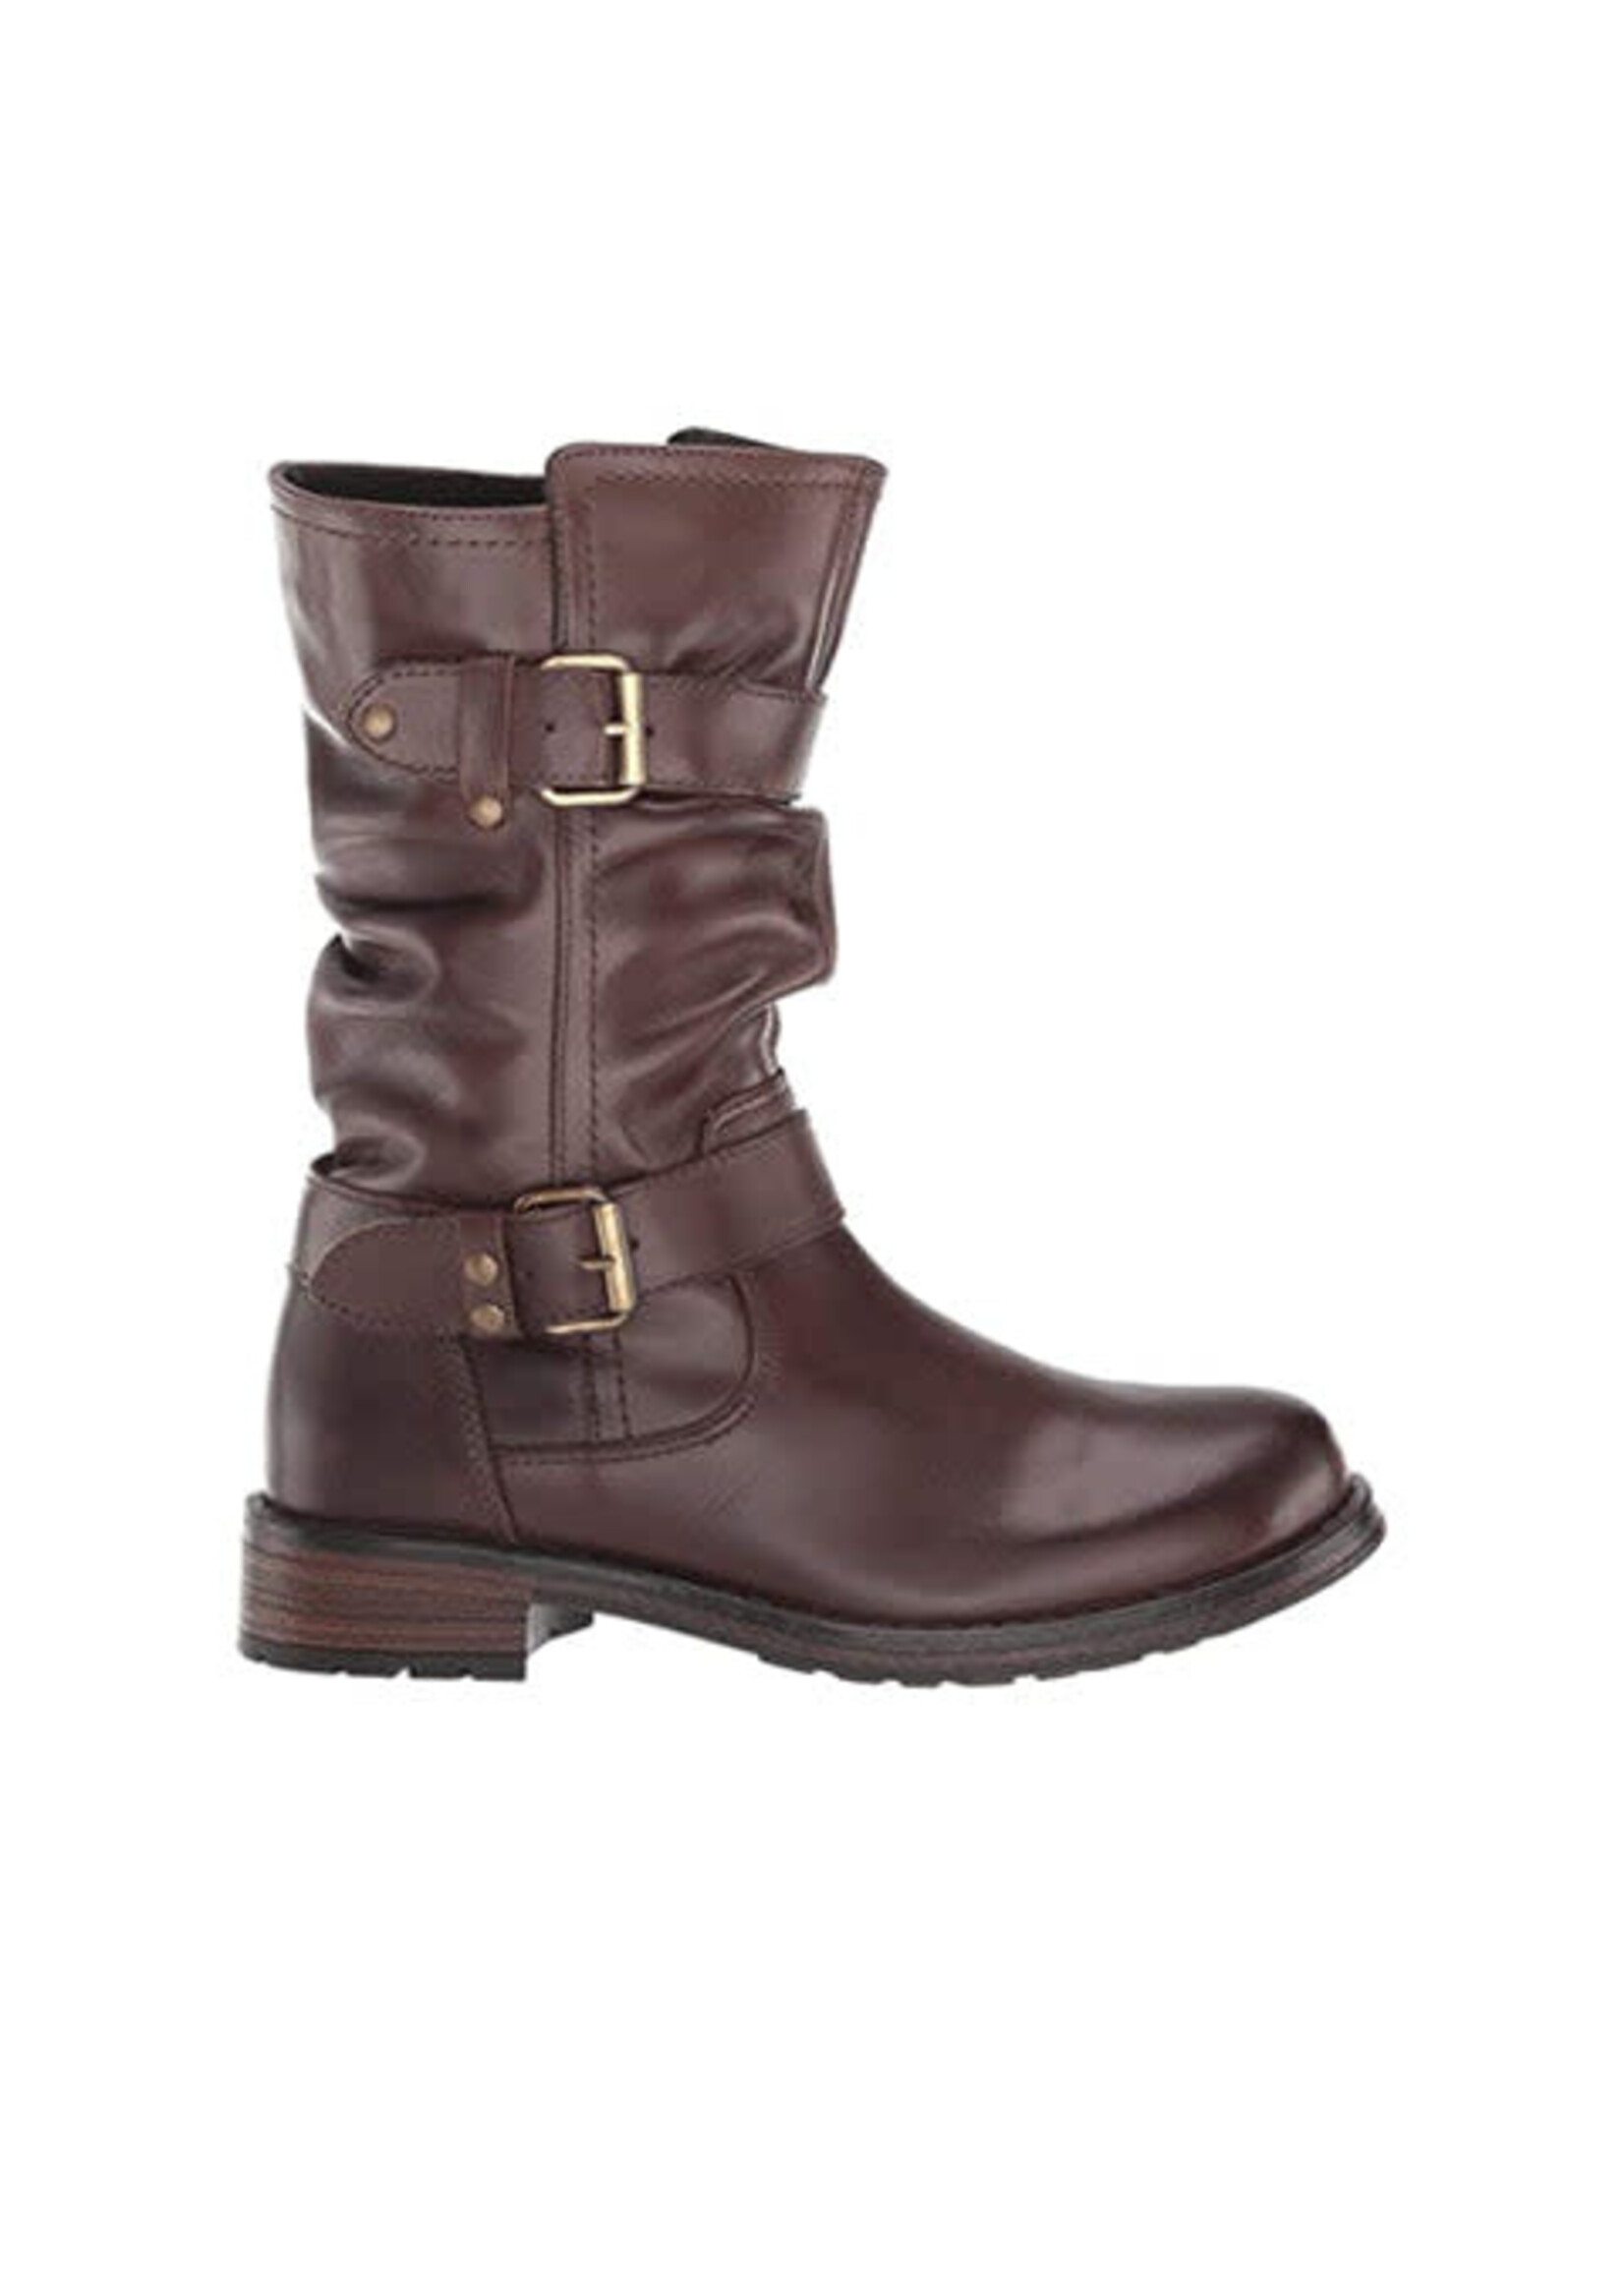 Eric Michael Noelle Brown Leather By Eric Michaels  Size 8 Only 25% Off